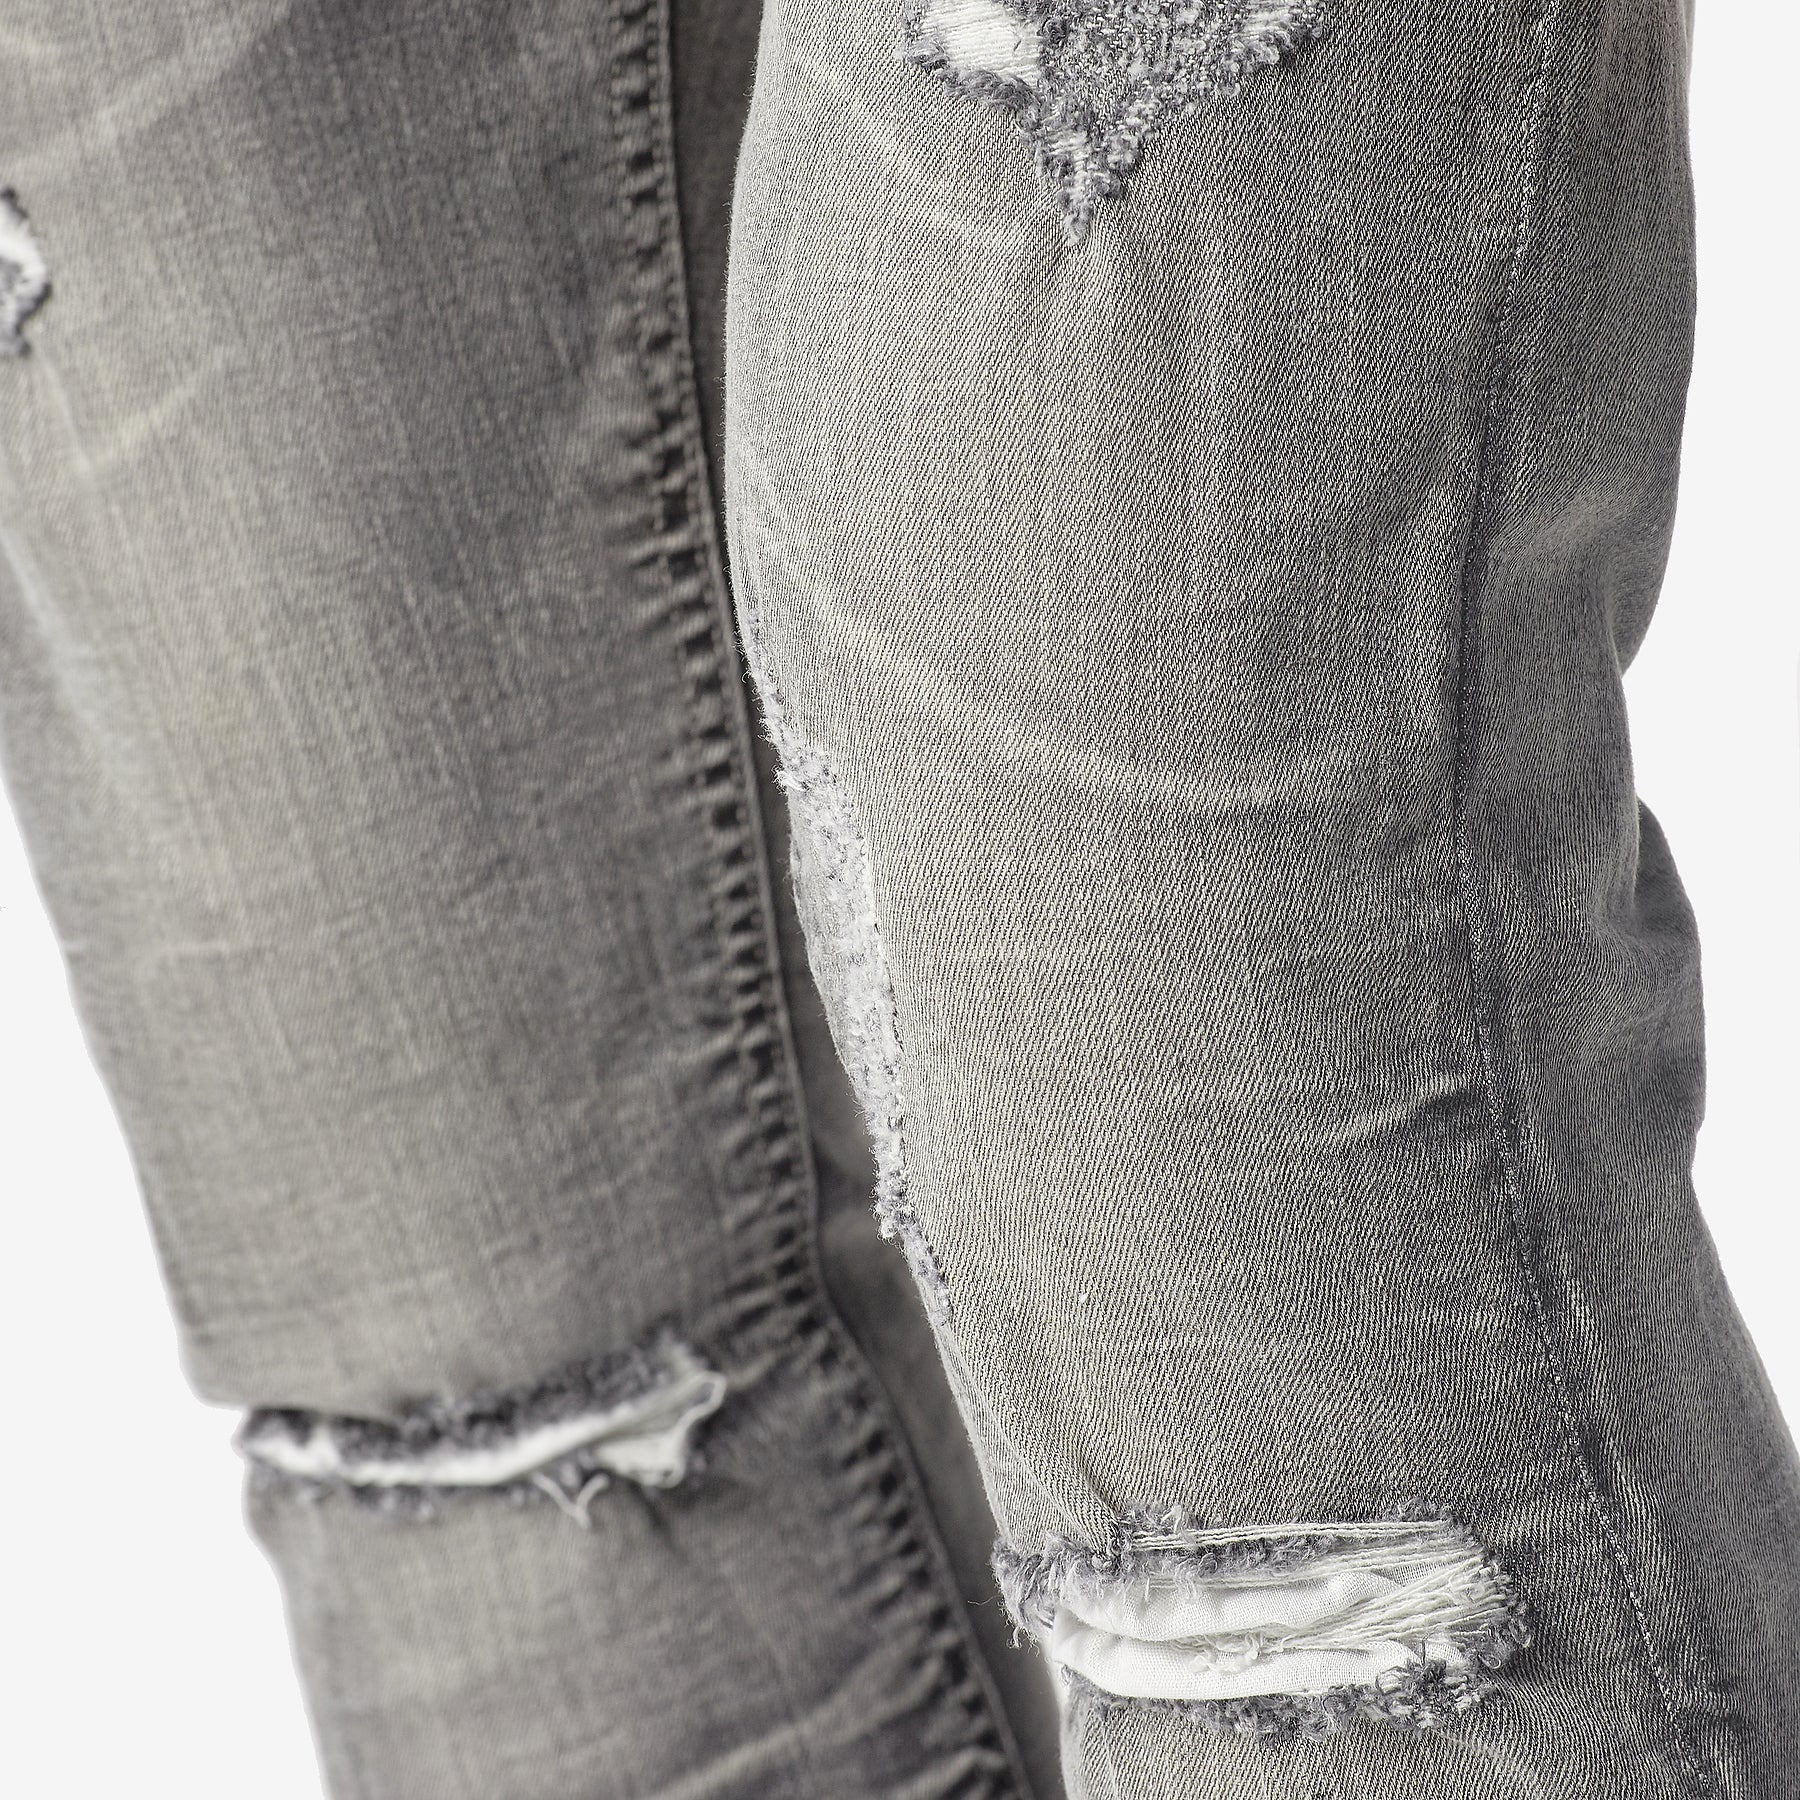 GREY STONE WASHED JEANS W/ RIP & FULL BACKING